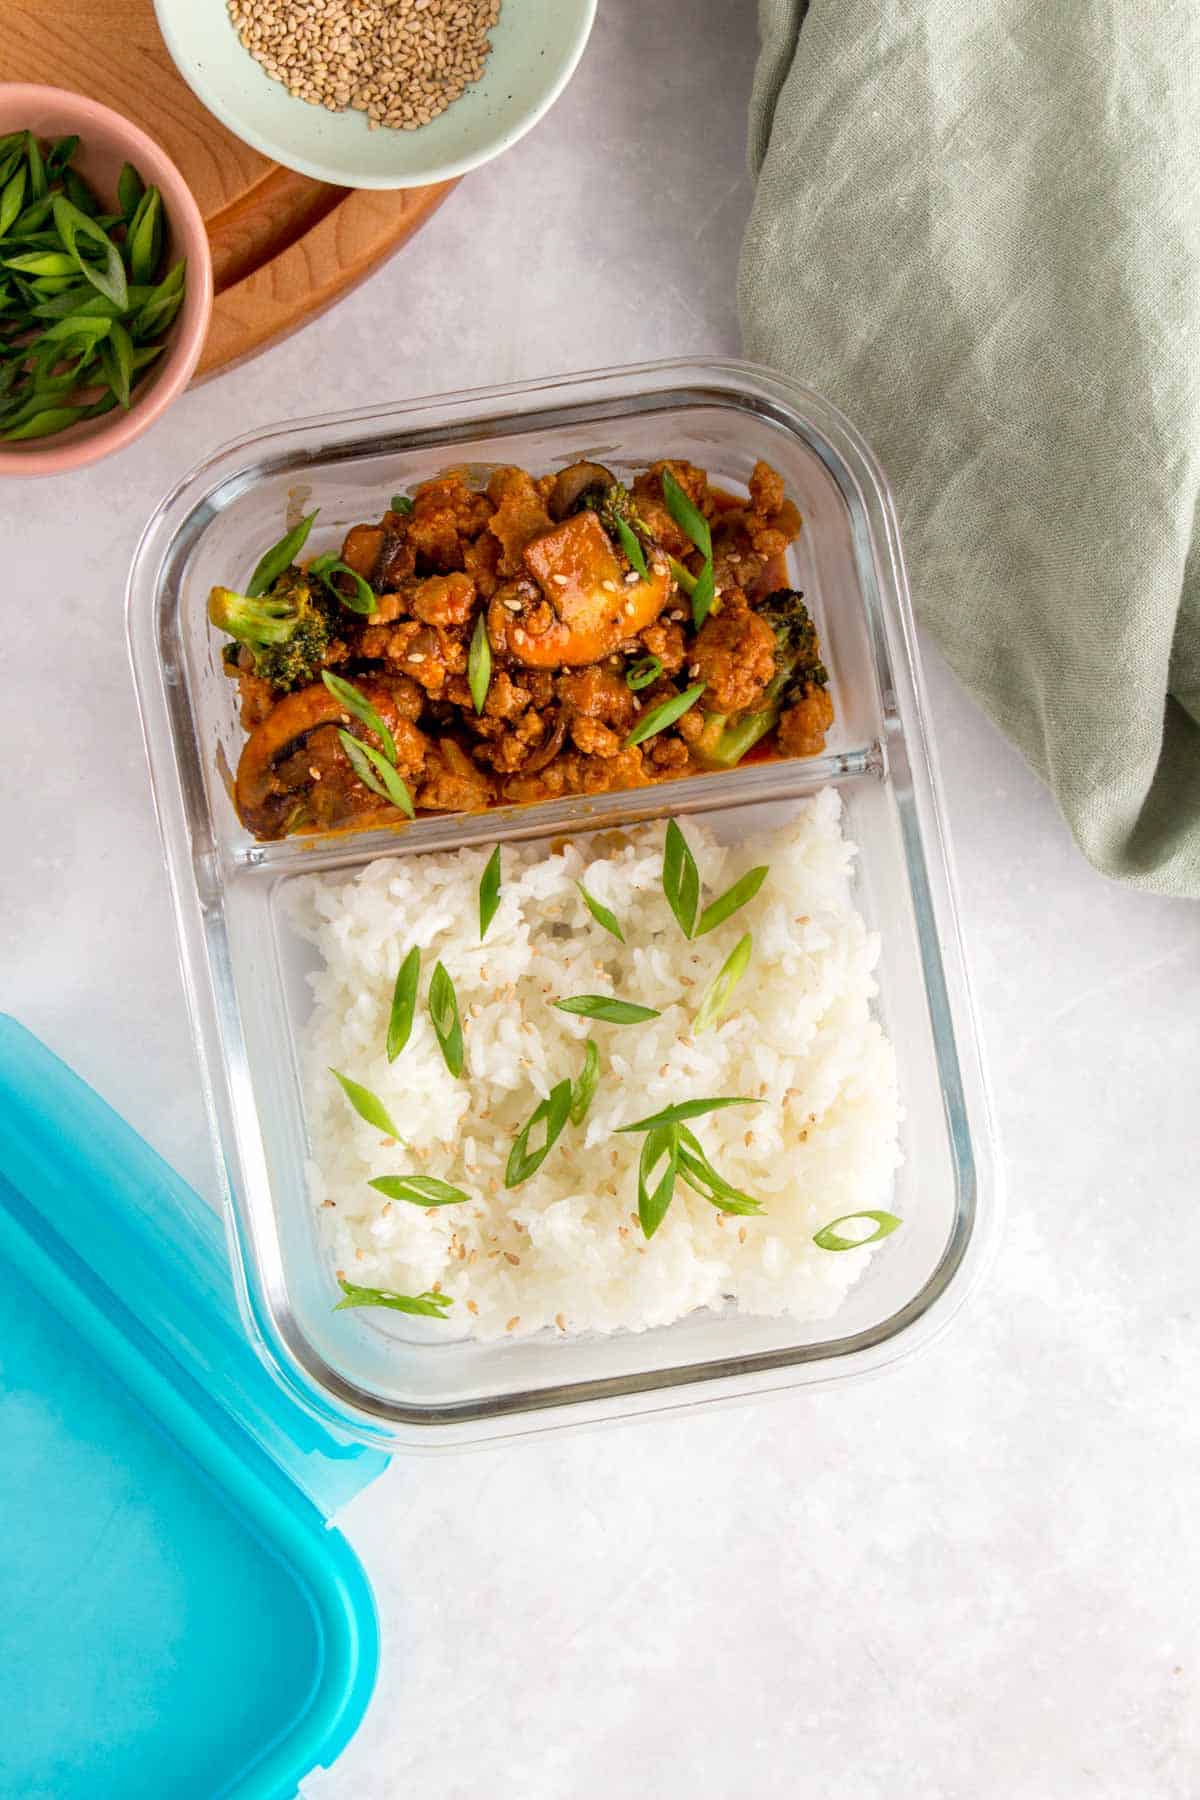 Meal prep container with rice and A plate of rice with spicy ground pork stir fry.